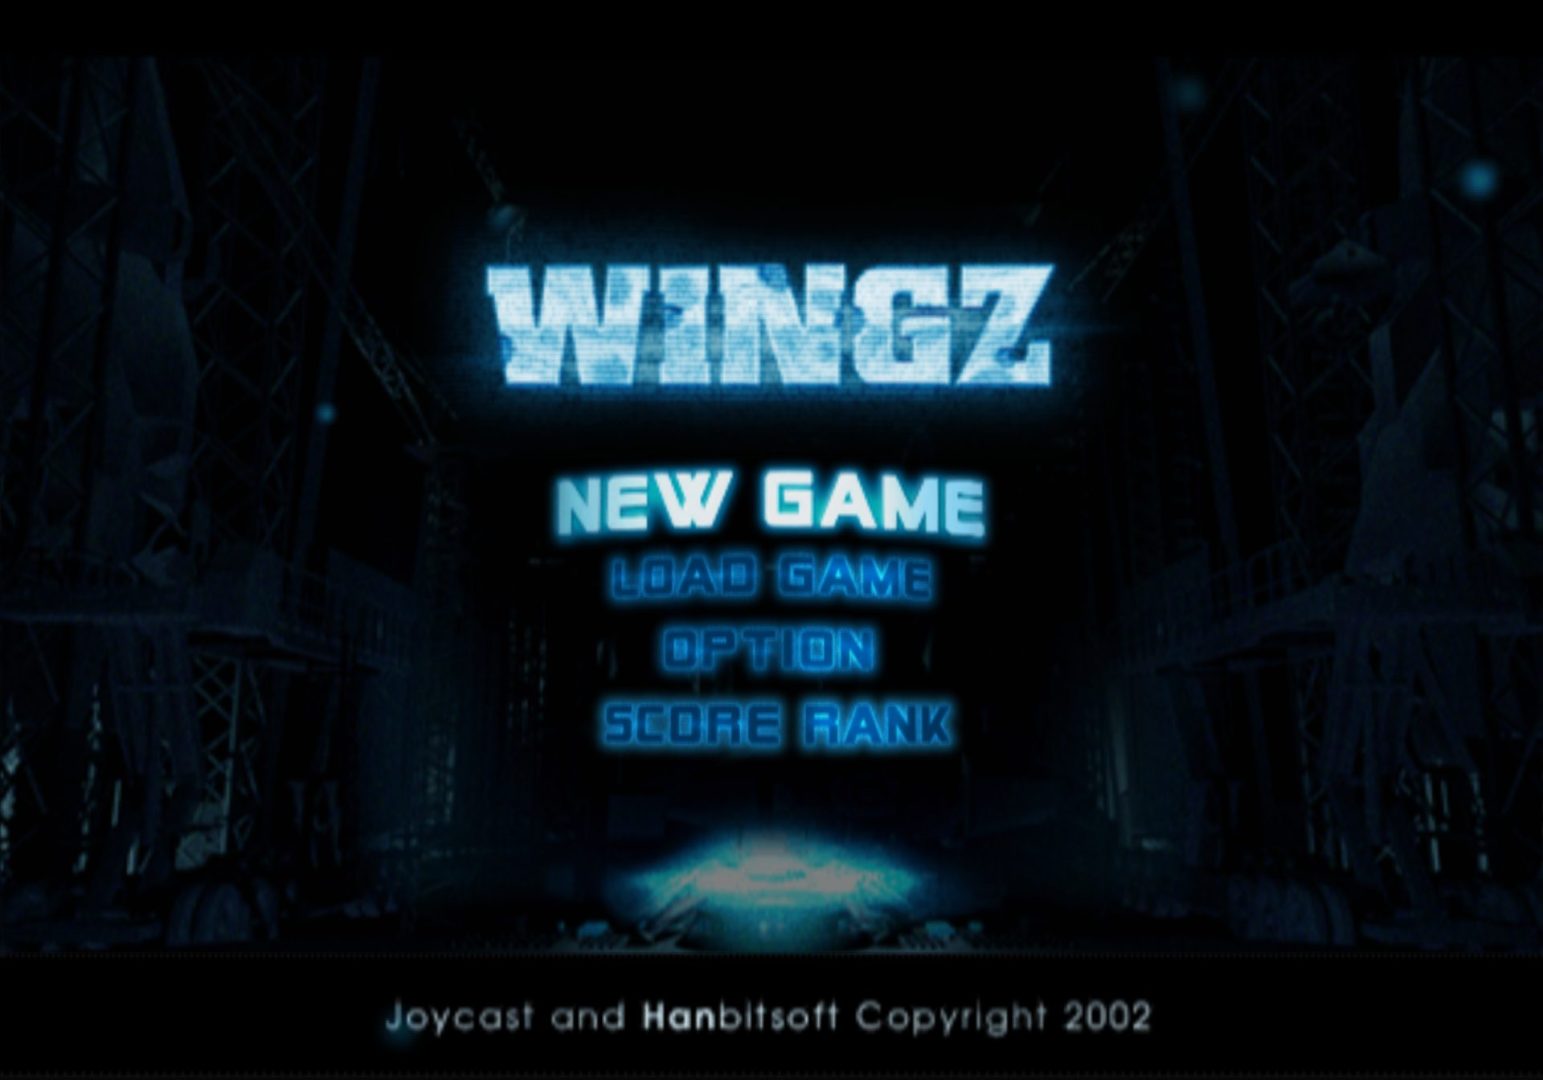 The coverart image of Wingz